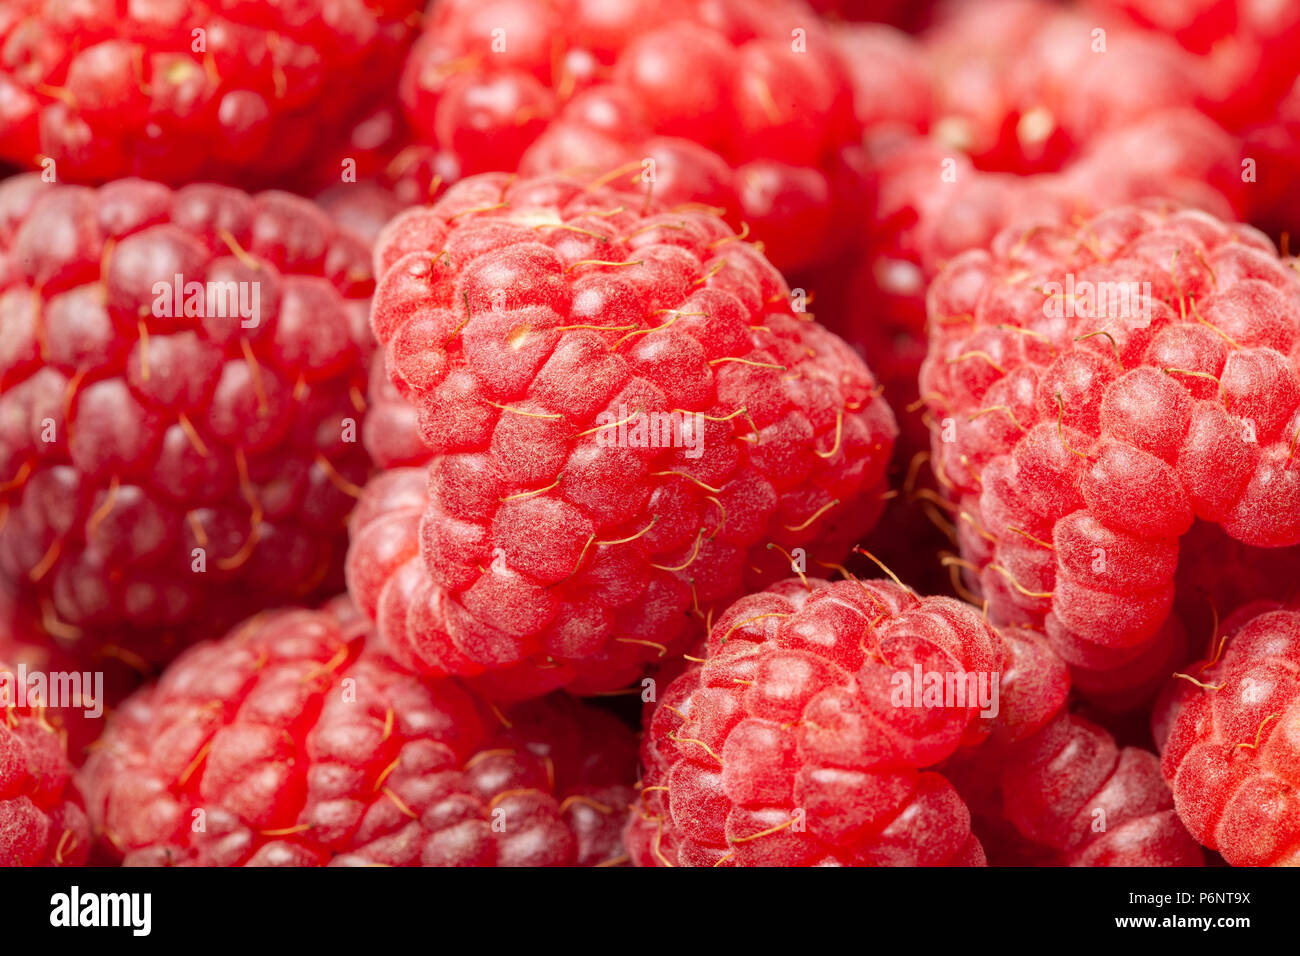 Ripe red and fresh raspberries close view as a background. Full frame image. Stock Photo